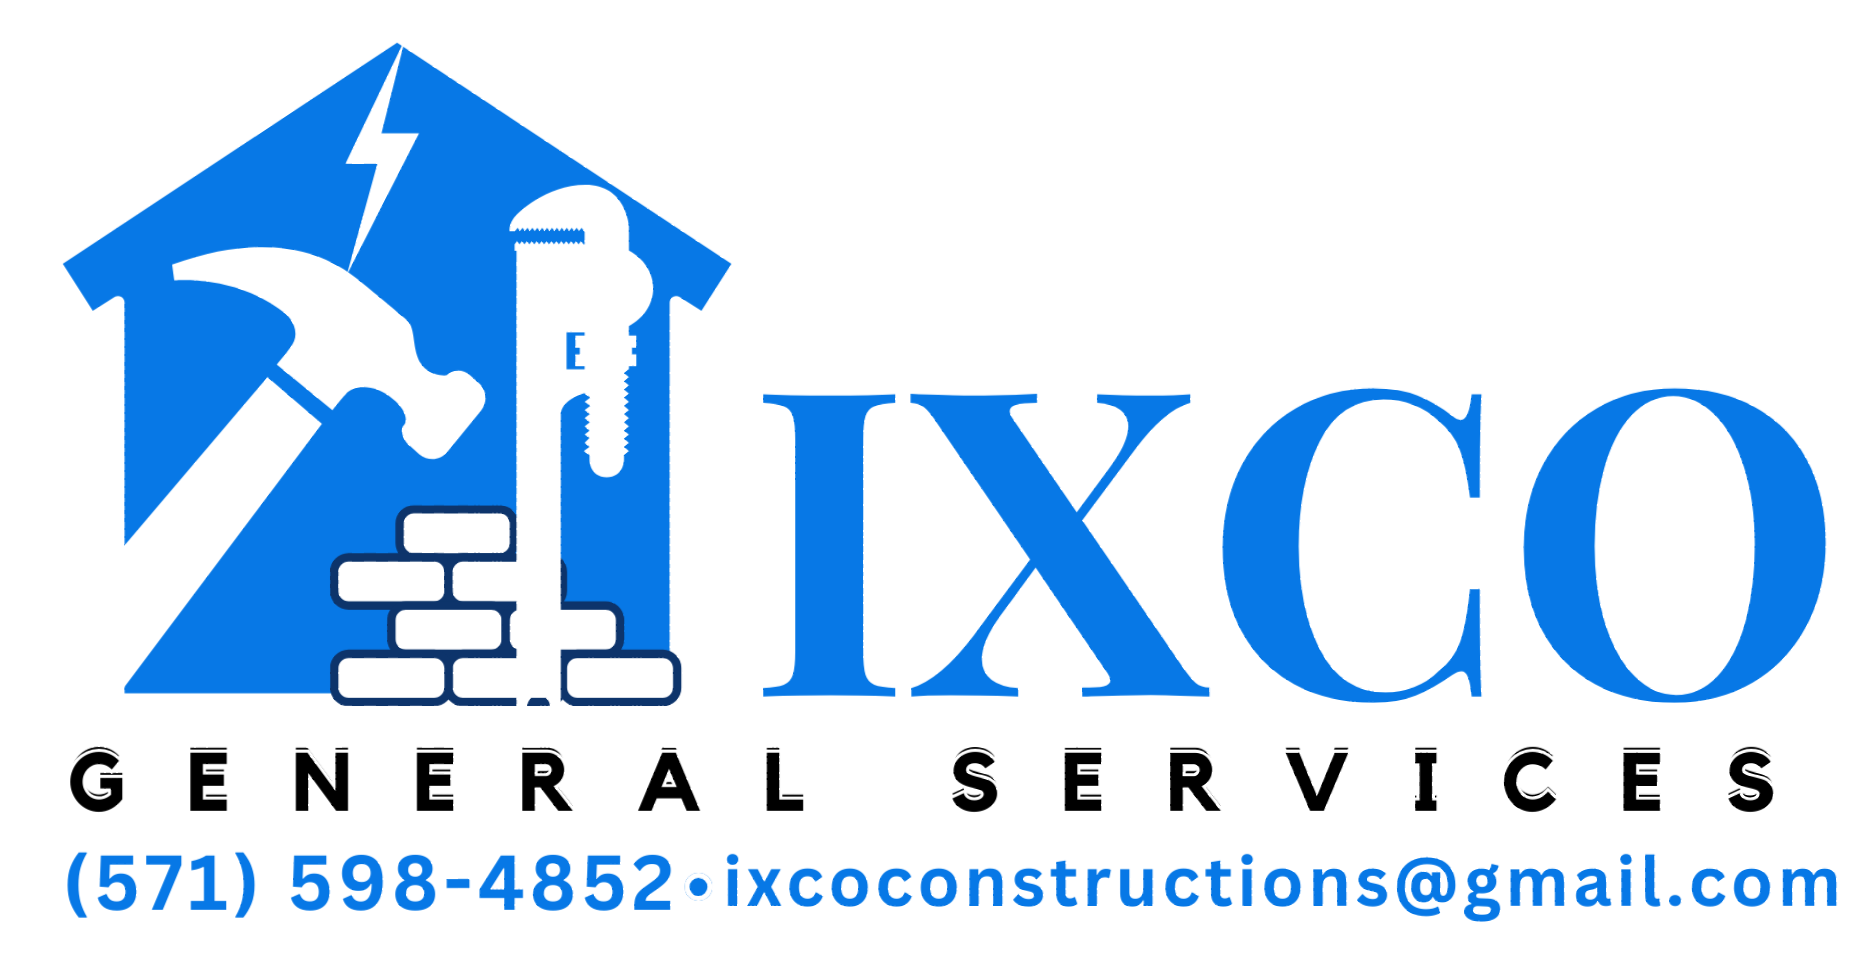 a blue and white logo for ixco general services